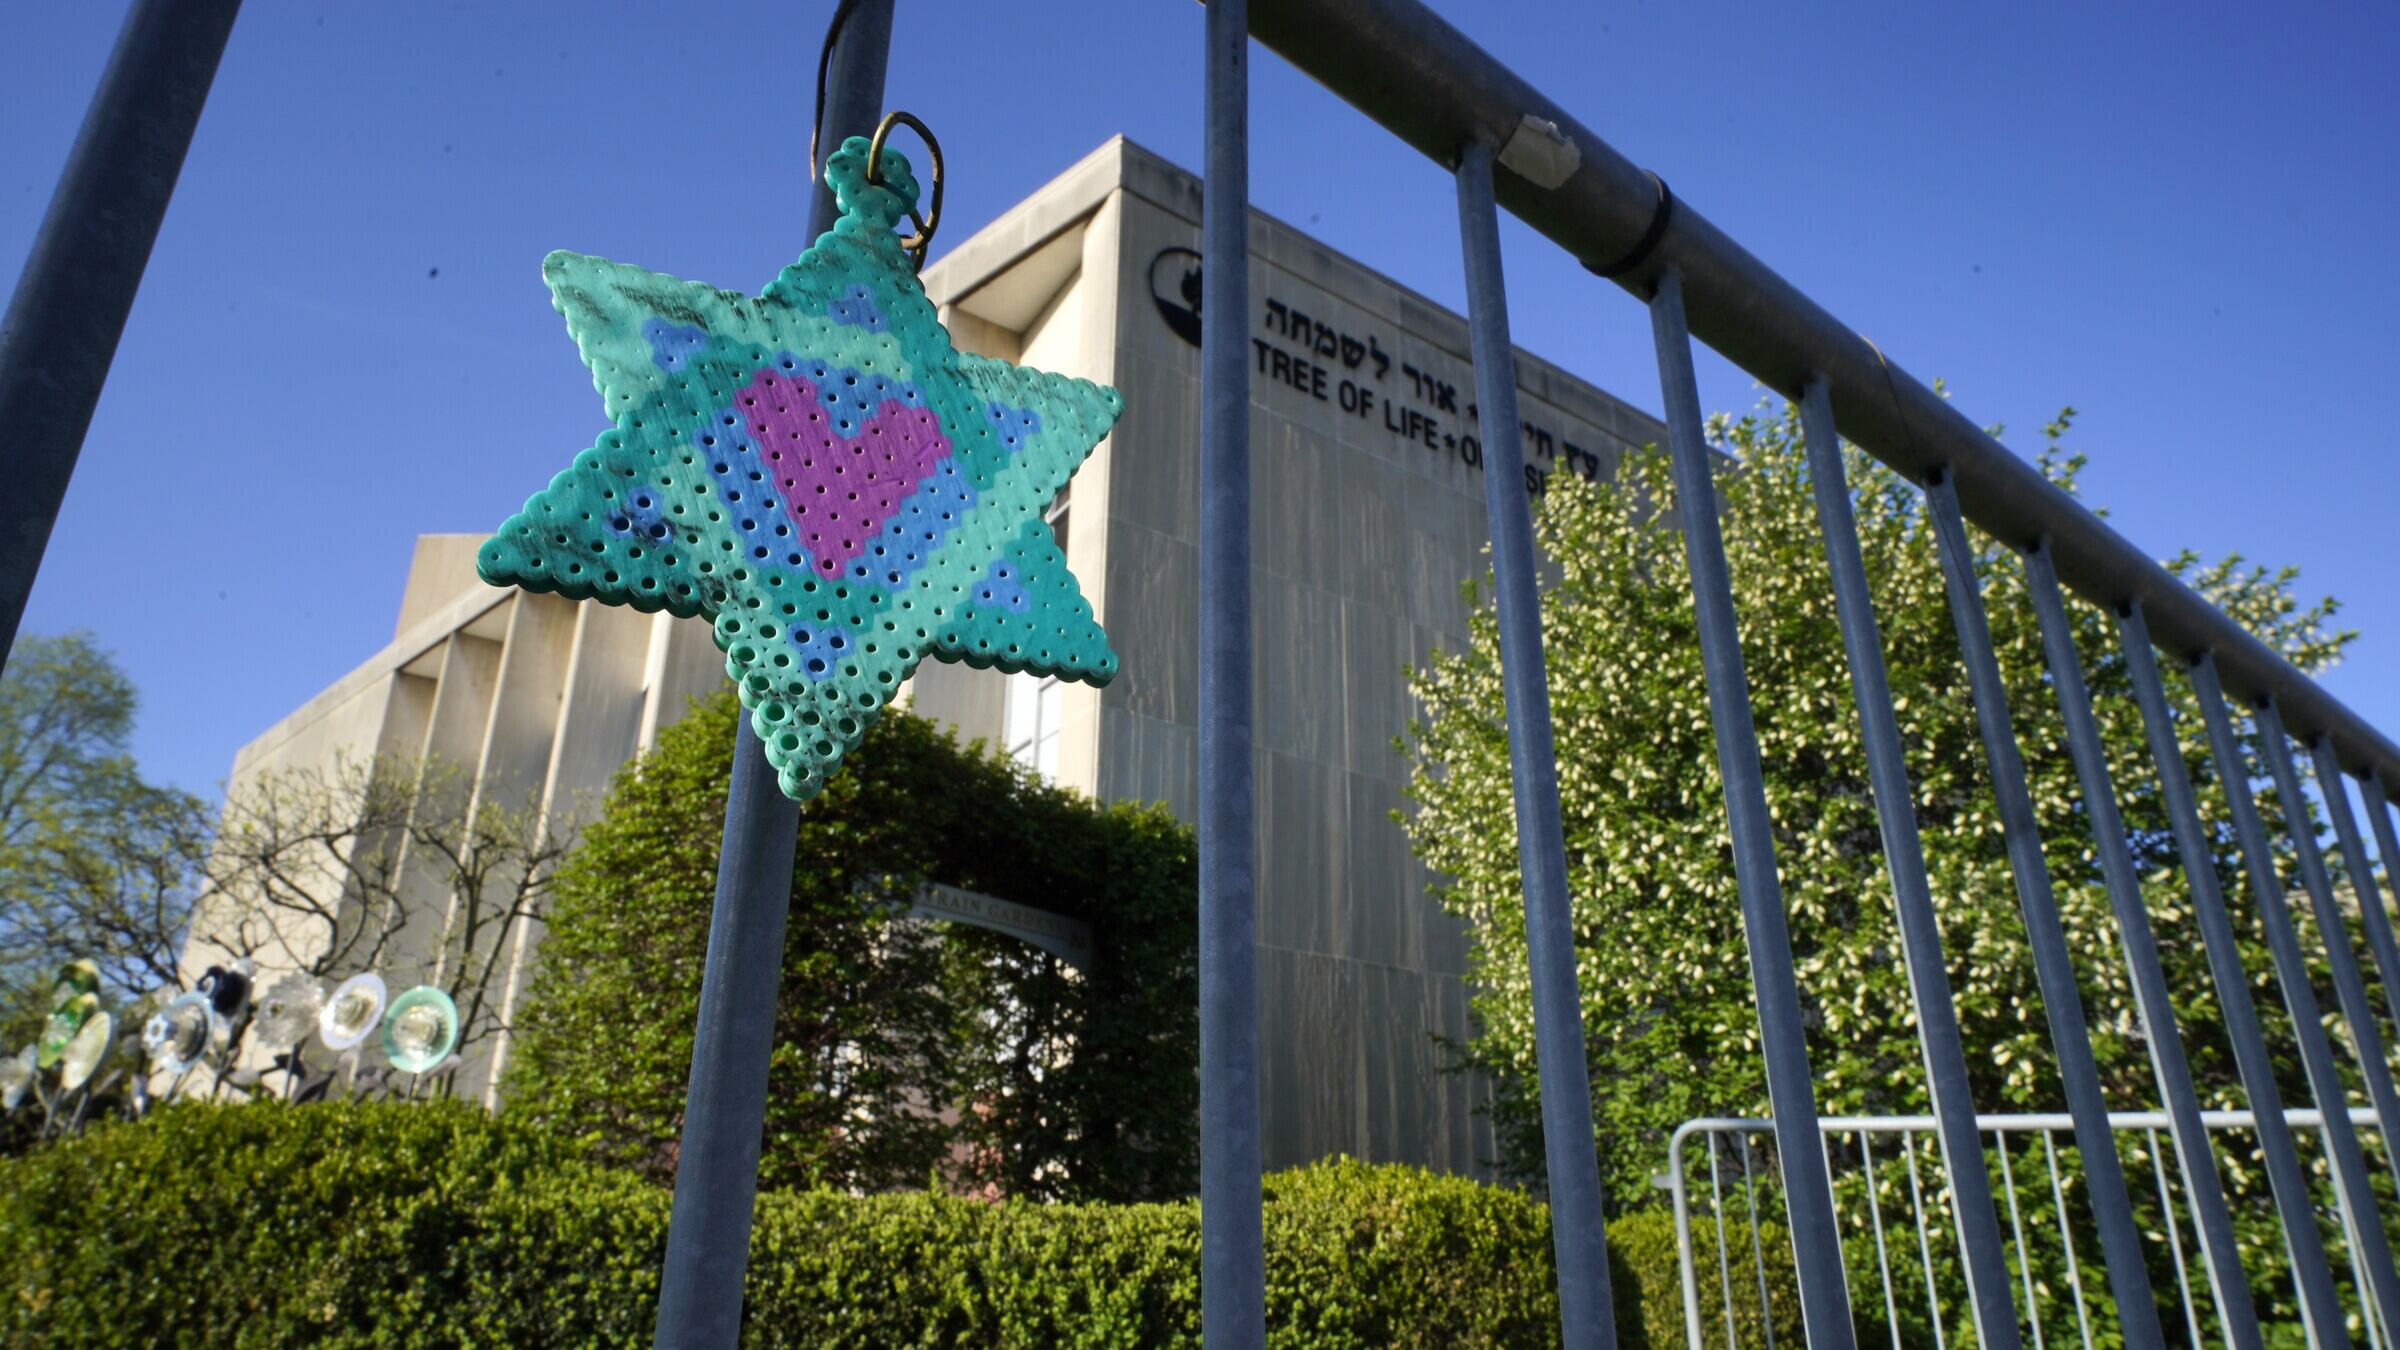 A Star of David hangs from a fence outside the scene of Robert Bowers’ attack, Tree of Life synagogue in Pittsburgh’s Squirrel Hill neighbourhood (Gene J Puskar/AP/PA)